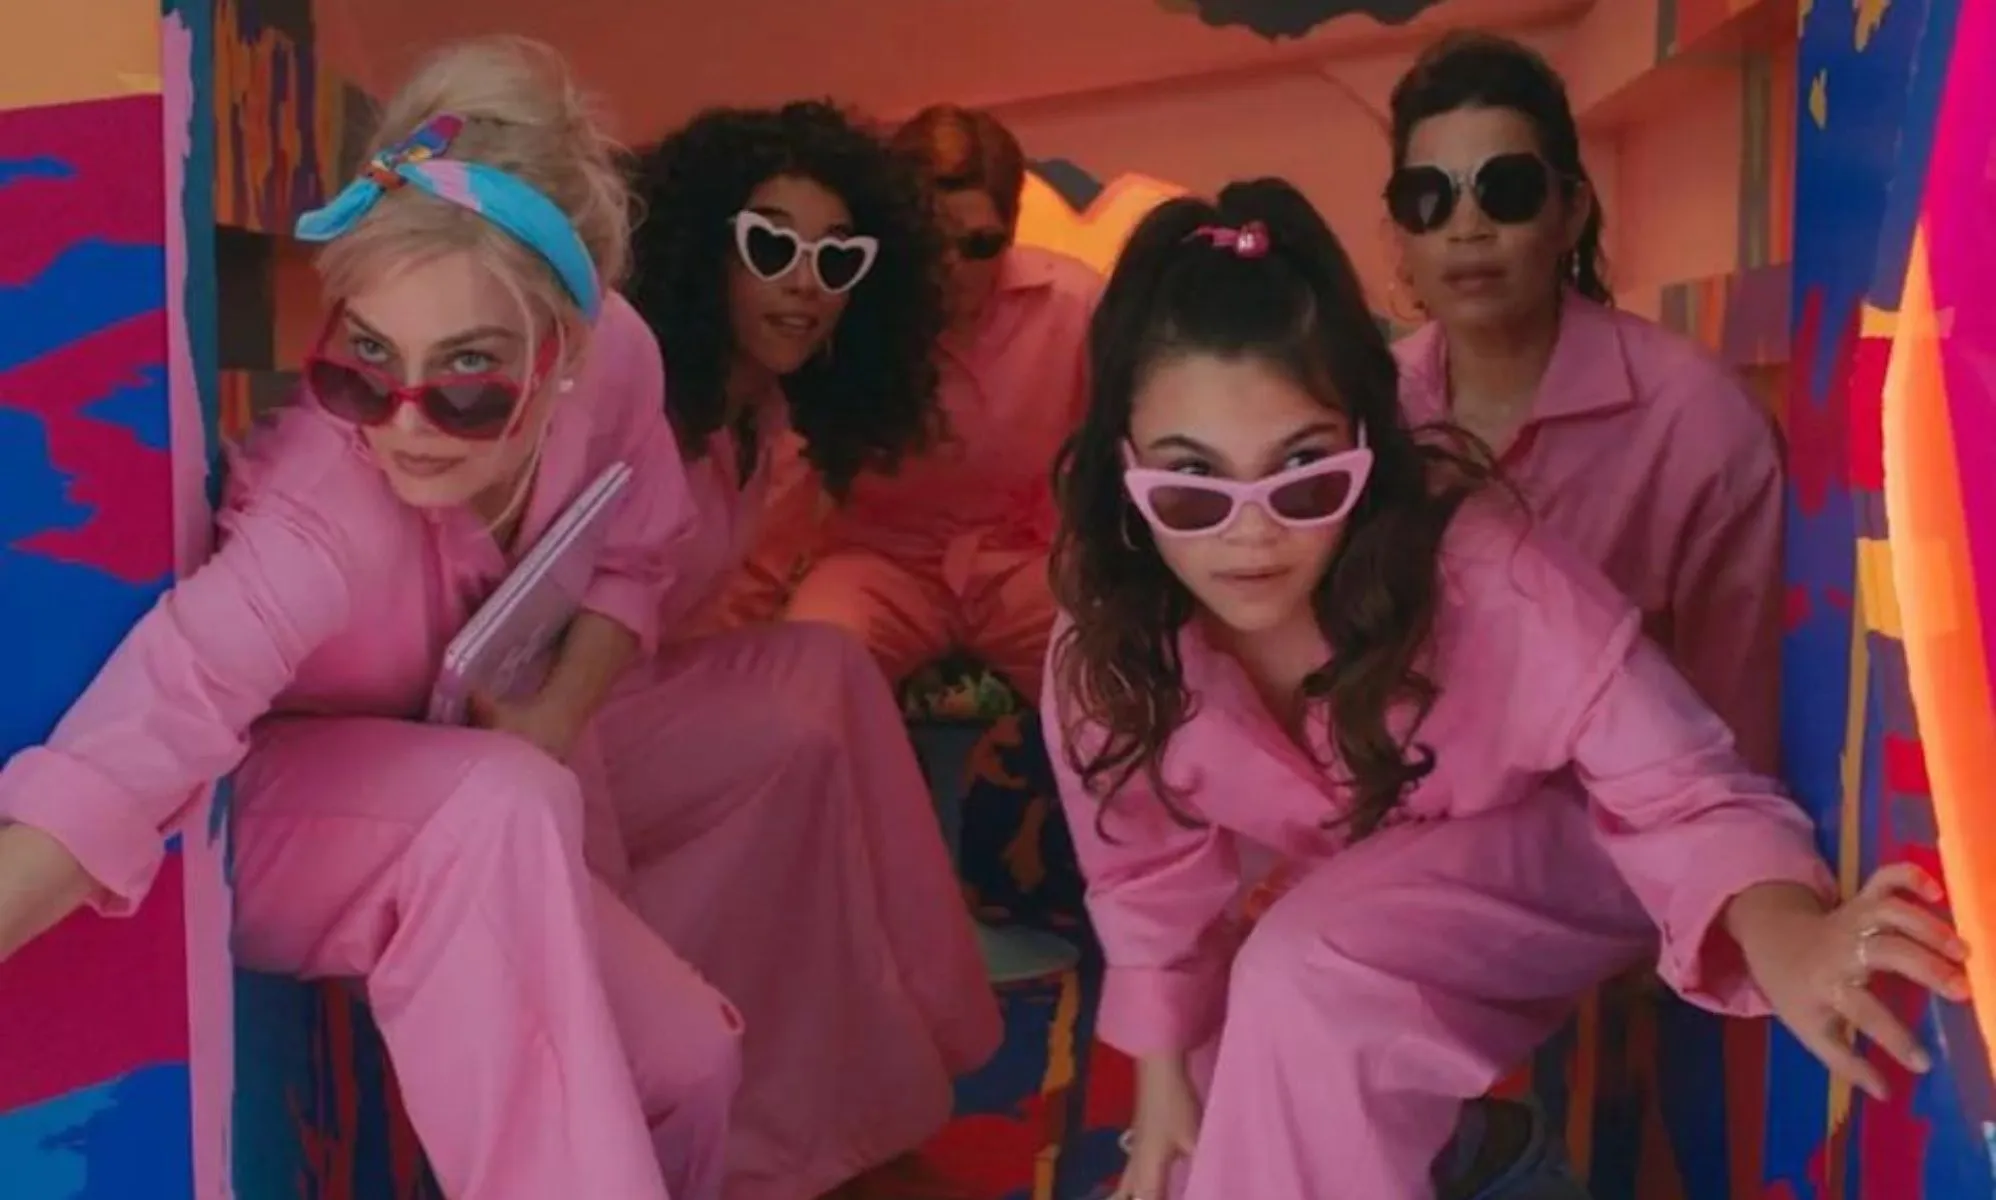 How to get the pink boilersuits from the Barbie movie